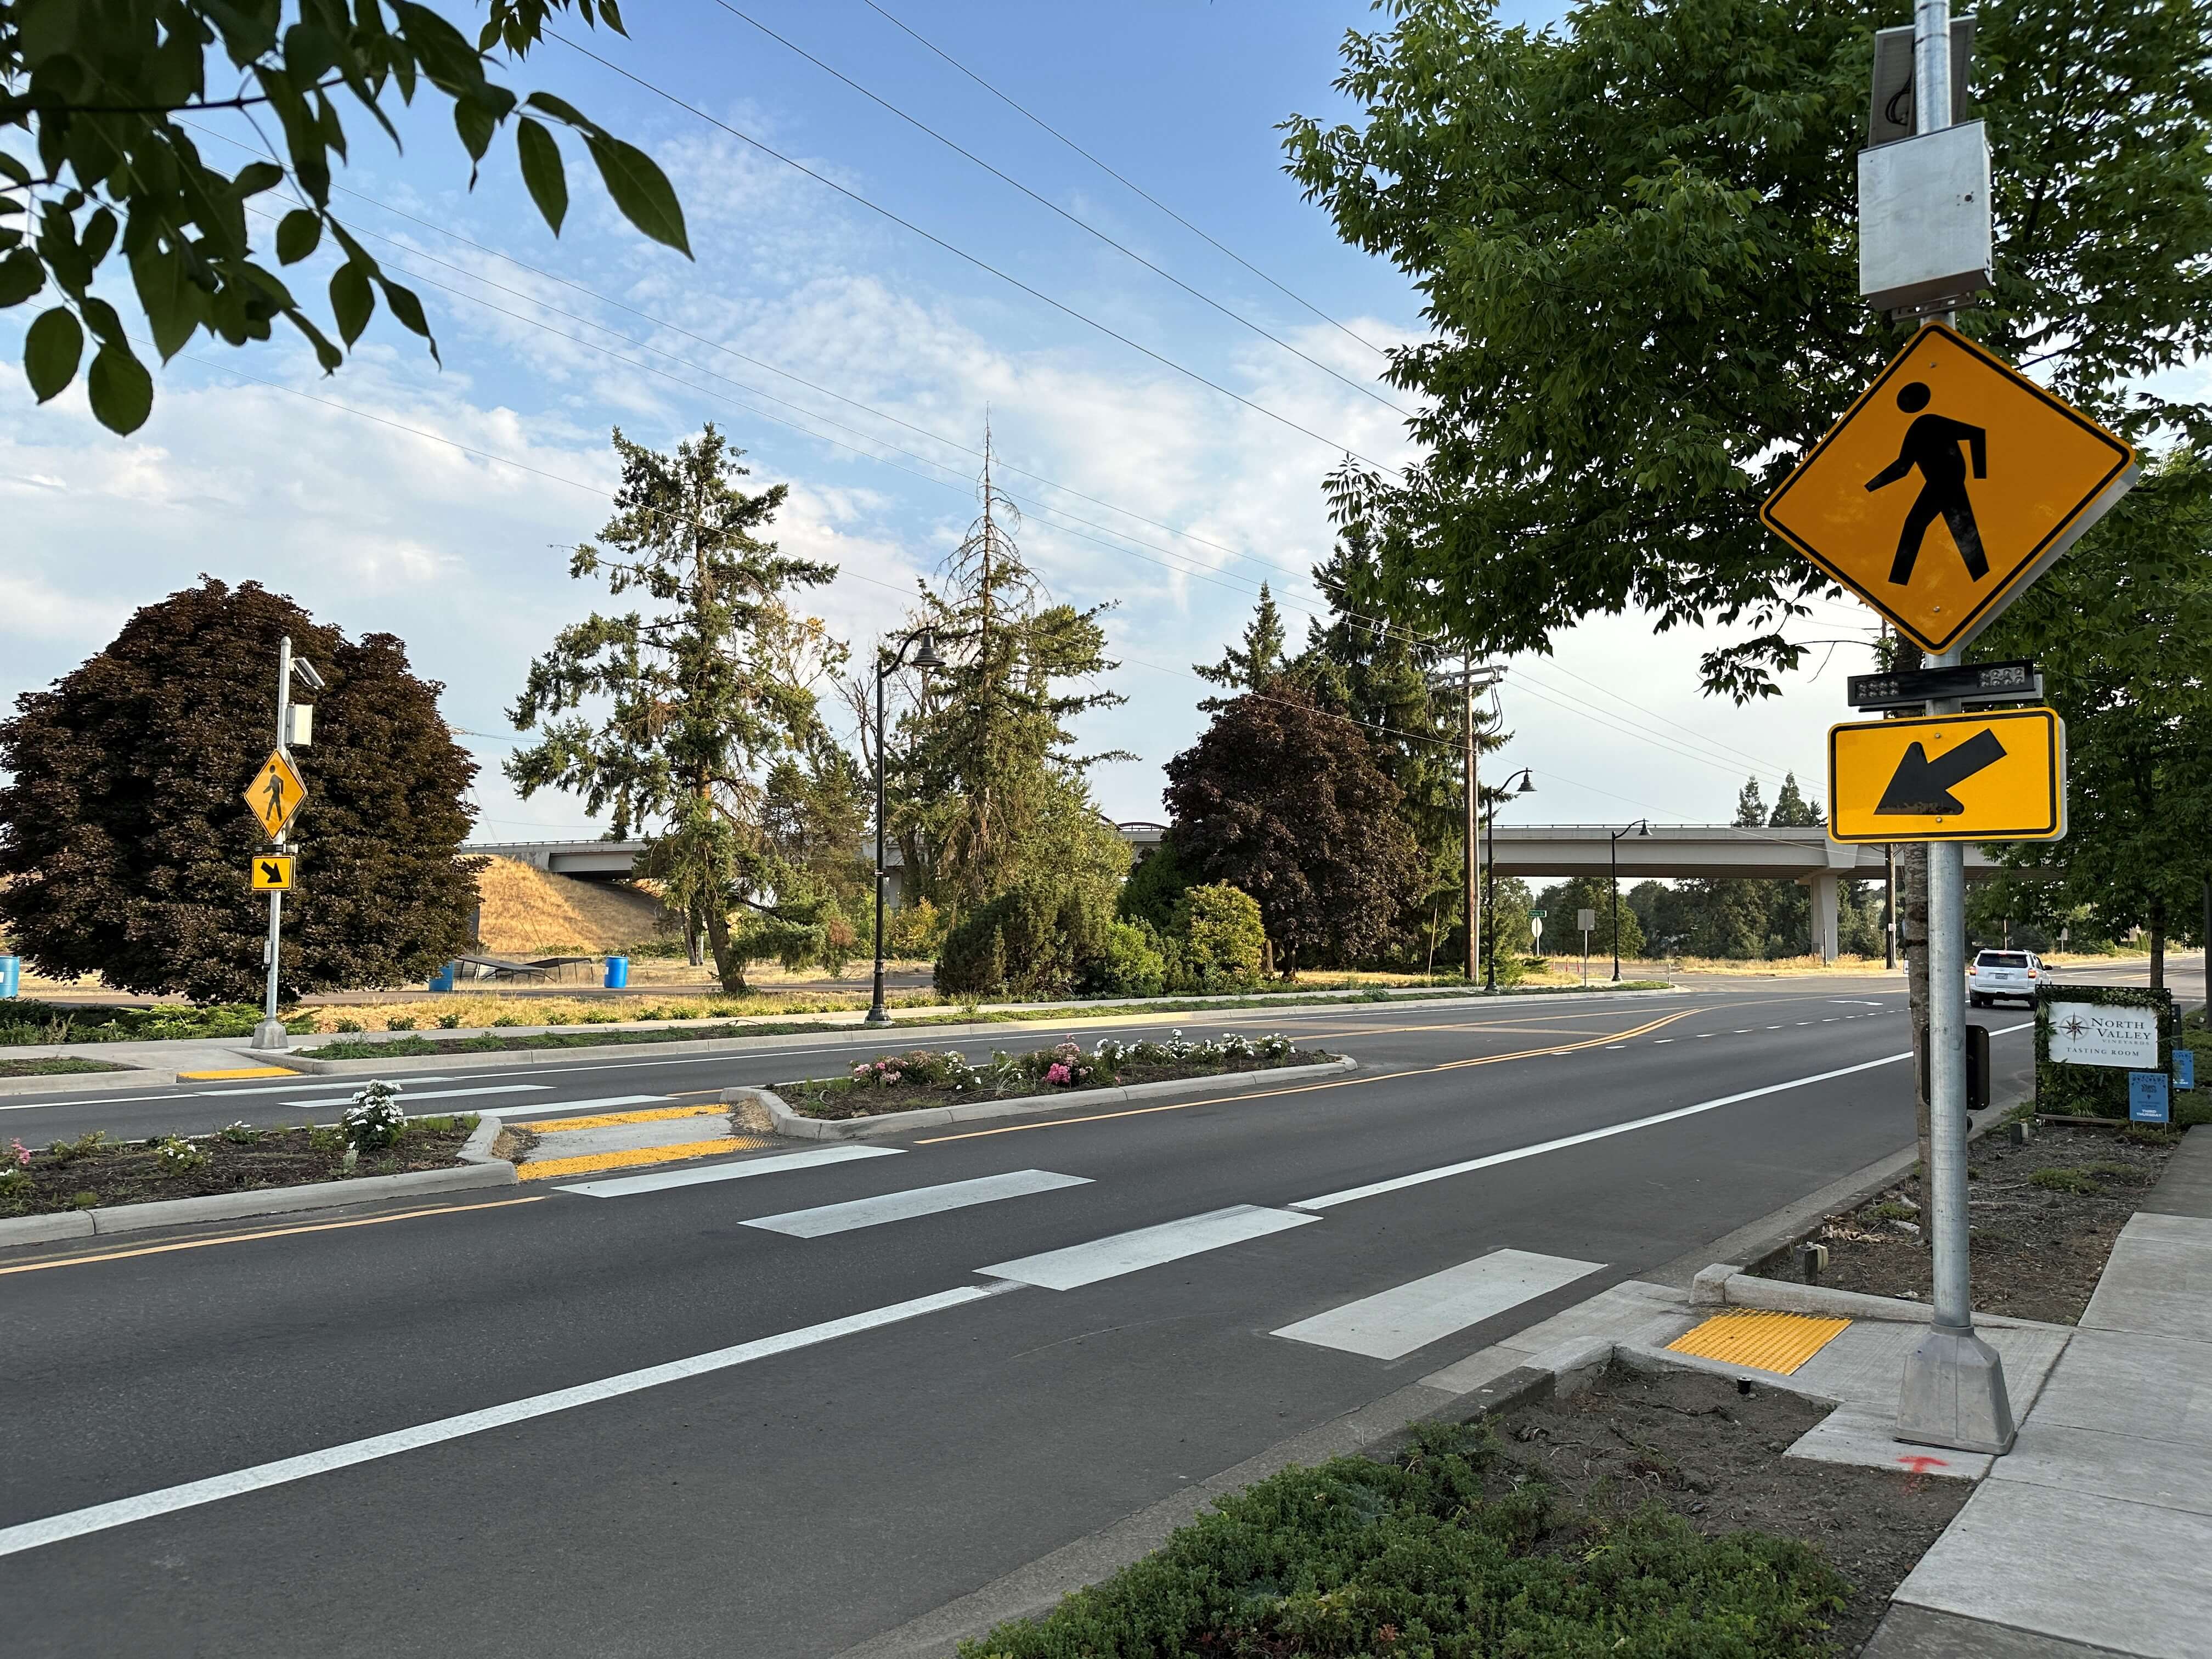 A four-lane road includes a crosswalk that has a rectangular rapid flashing beacon at the pedestrian crossing, pedestrian crossing signs, and curb ramps on both sides, clear pavement markings throughout, and a refuge island.